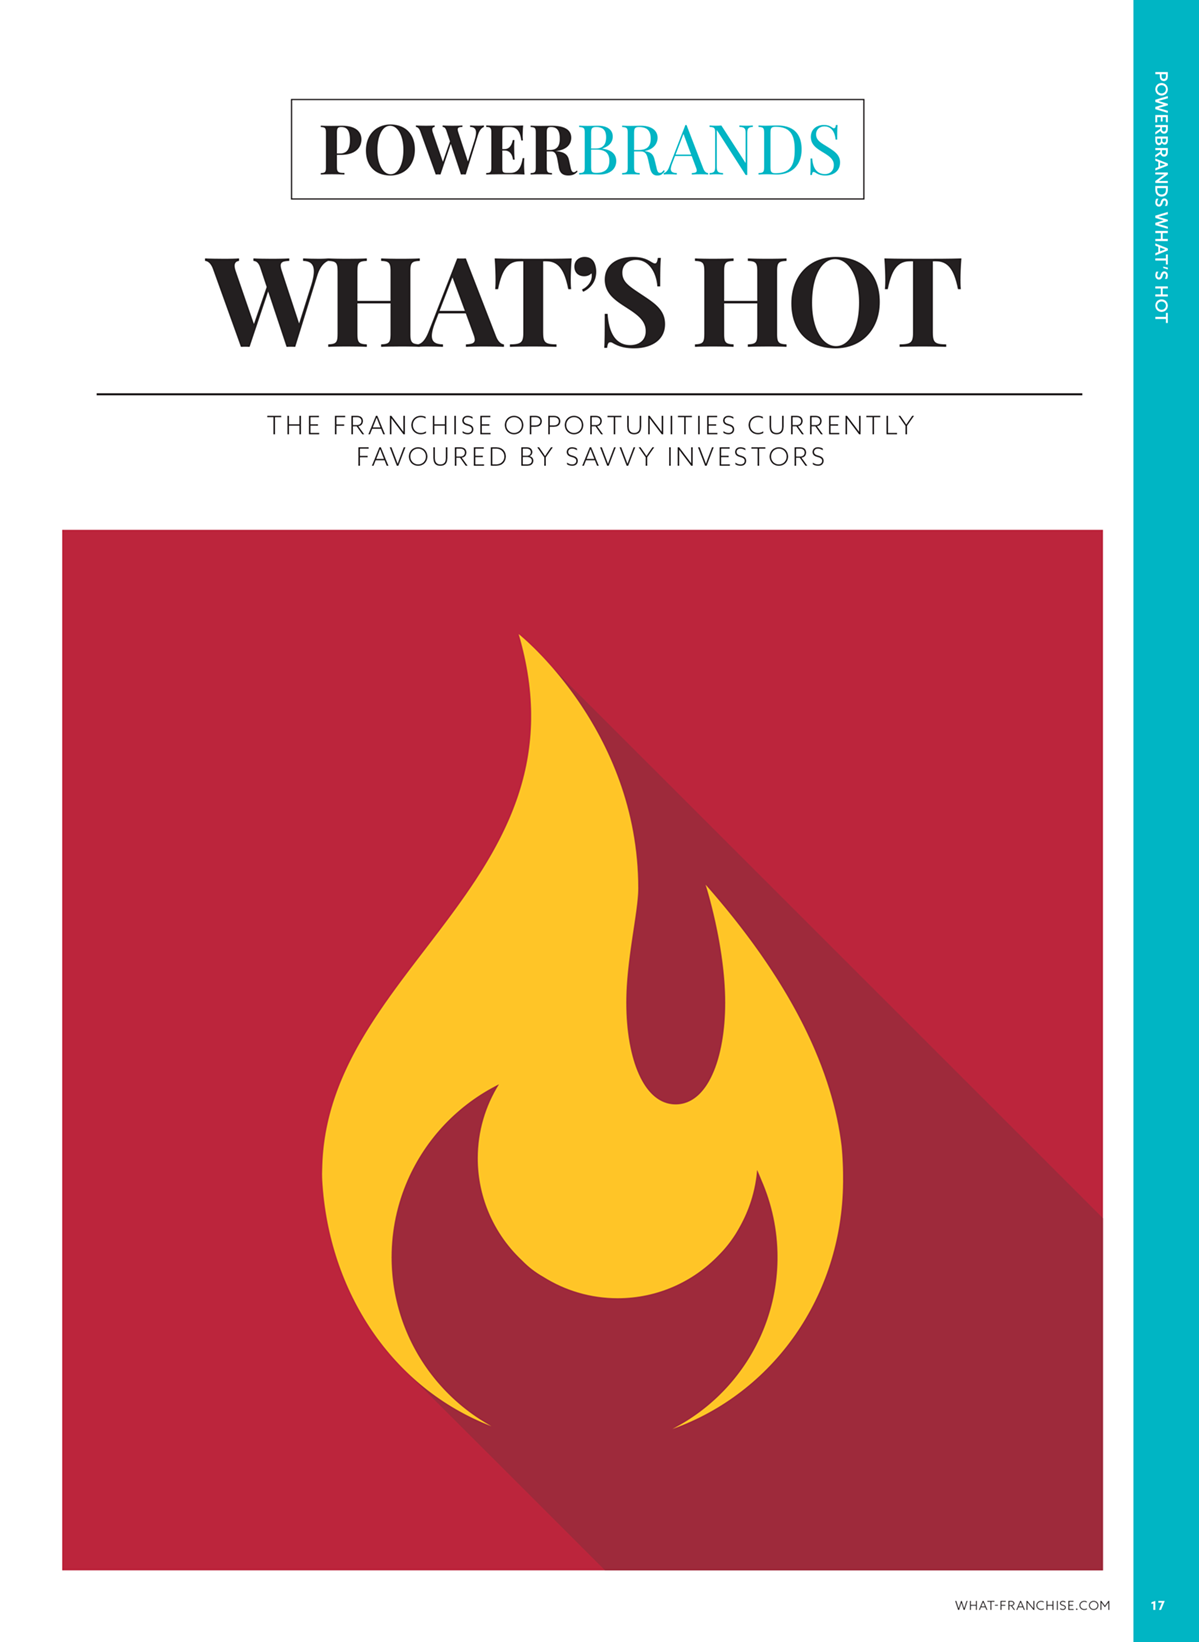 Powerbrands: What’s hot